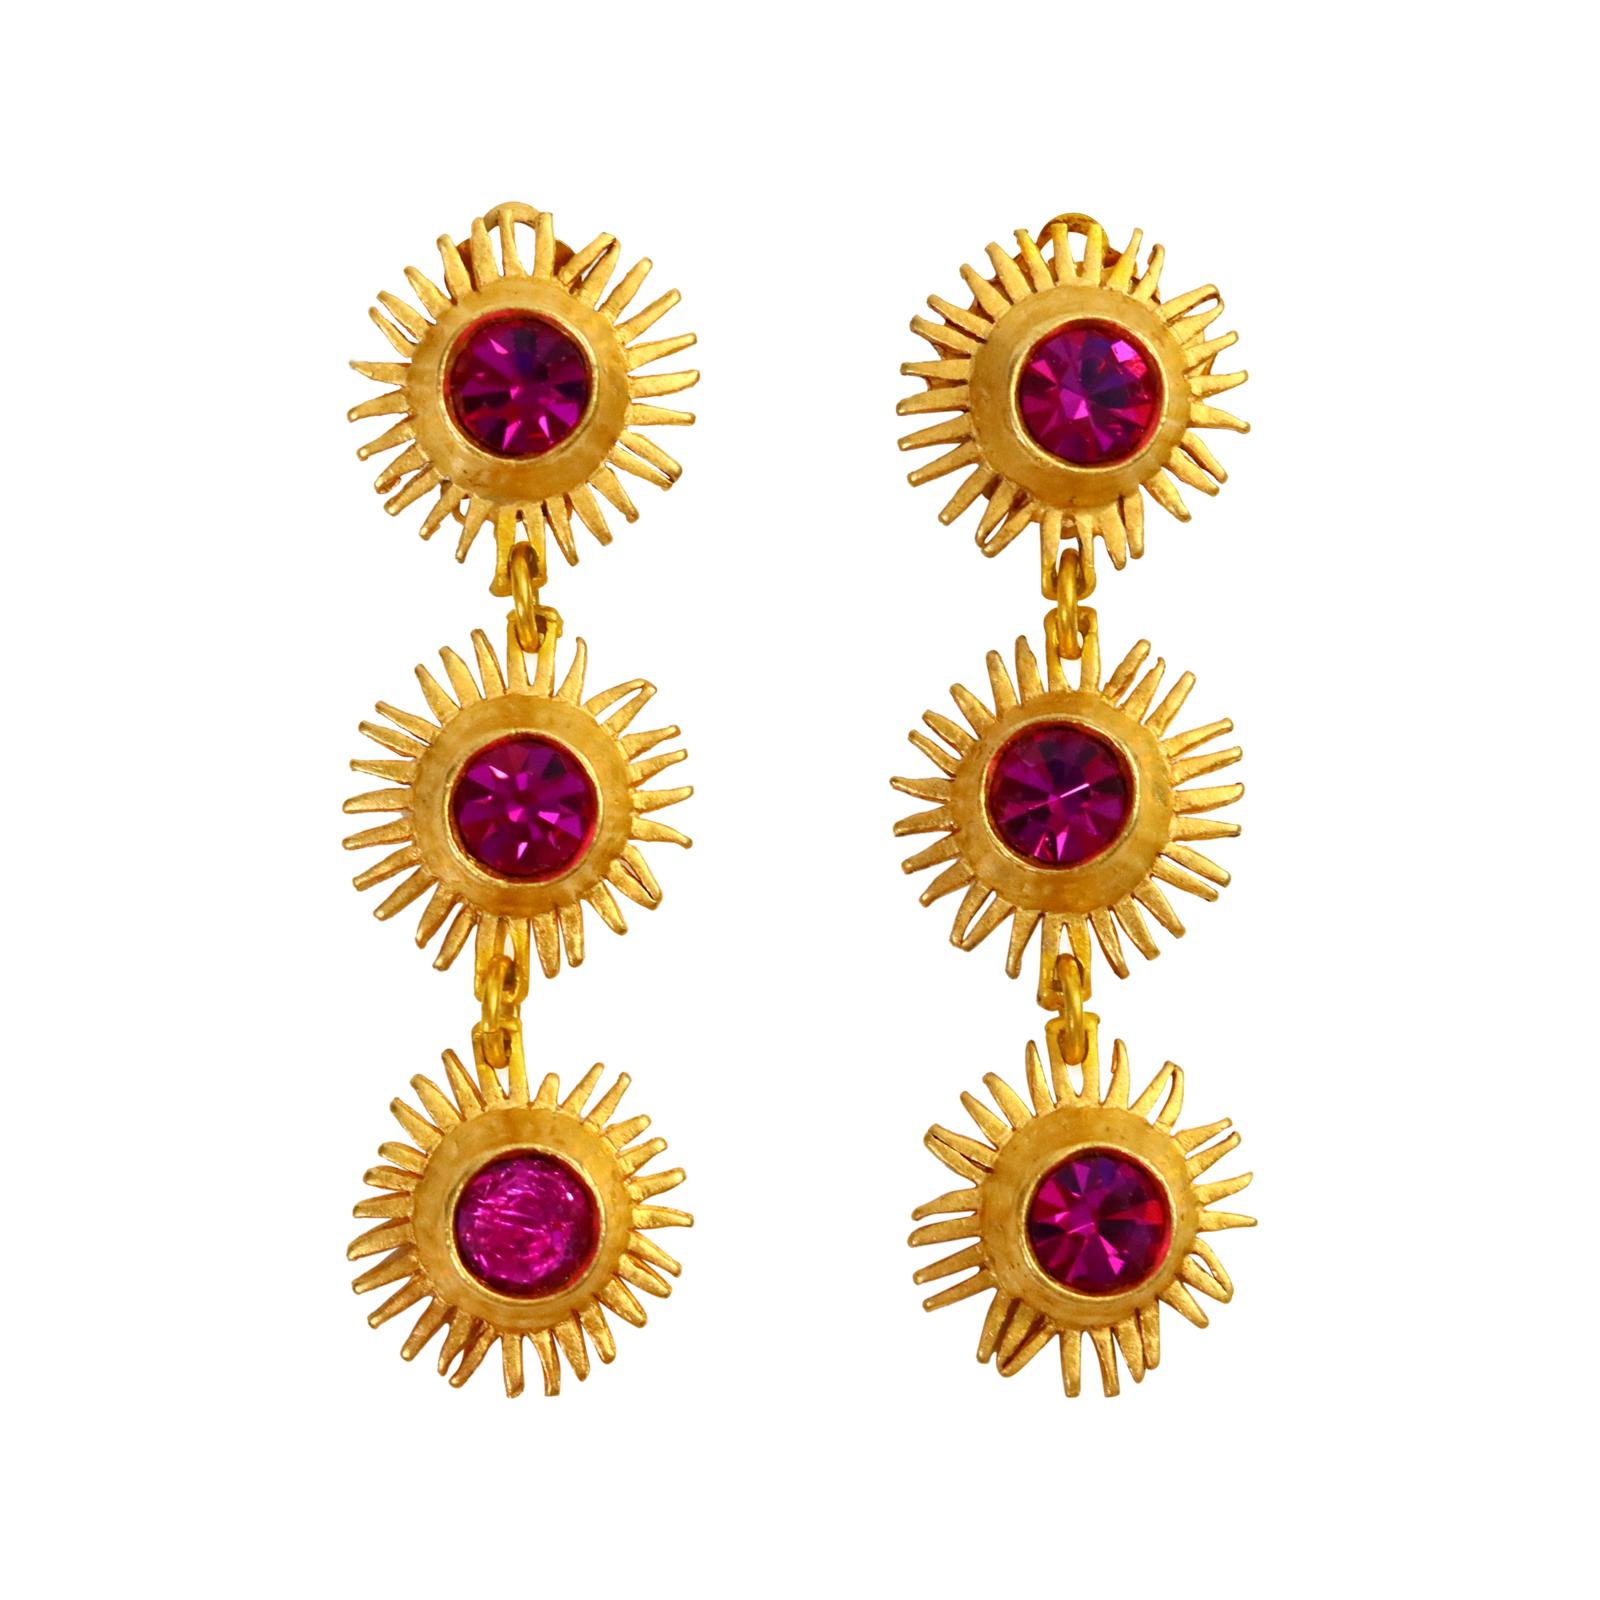 Vintage Edouard Rambaud Gold Earrings with Pink Crystals Circa 1980s.  These look like suns that have pink crystals in the middle.  They are so well made. There is a bracelet to match on site and also a necklace with clear crystals. The back is